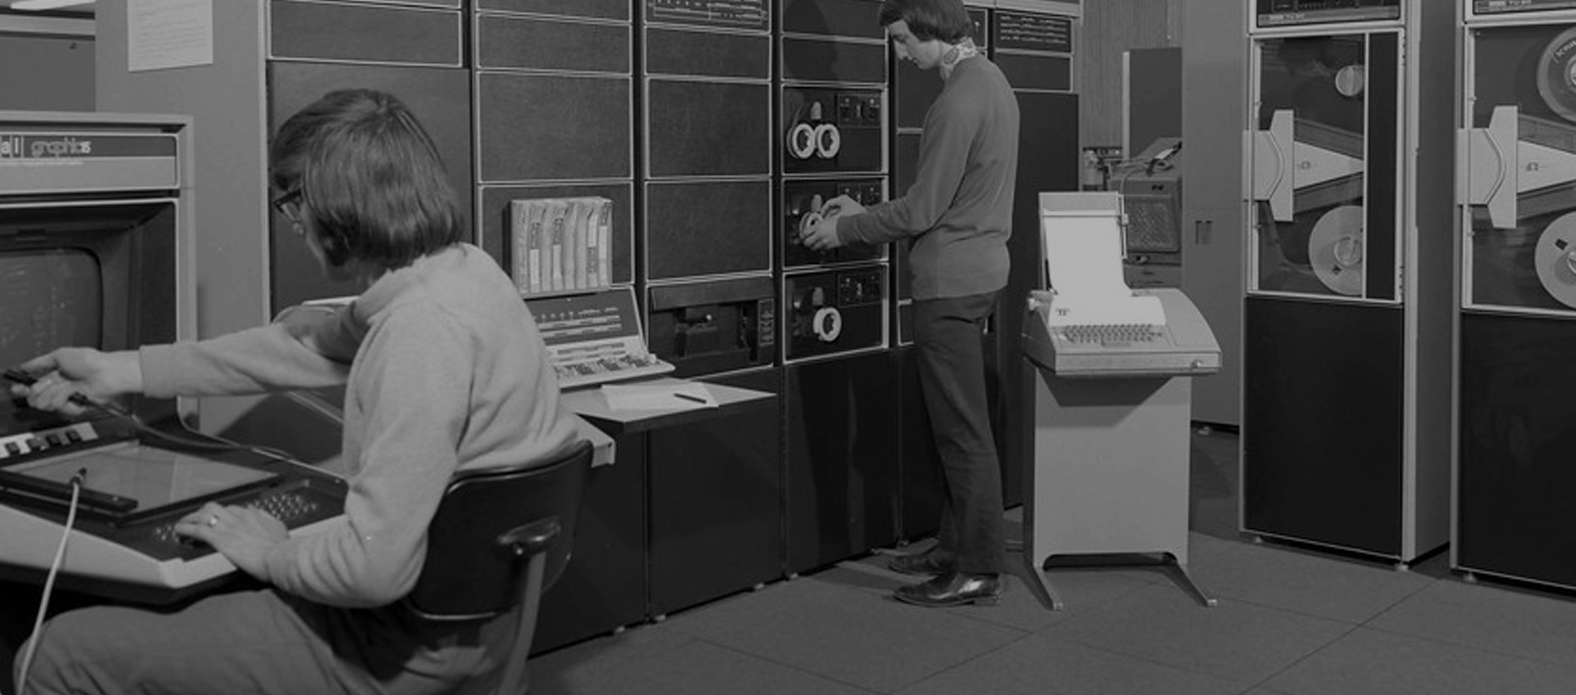 Old fashioned photo of people working in server hosting